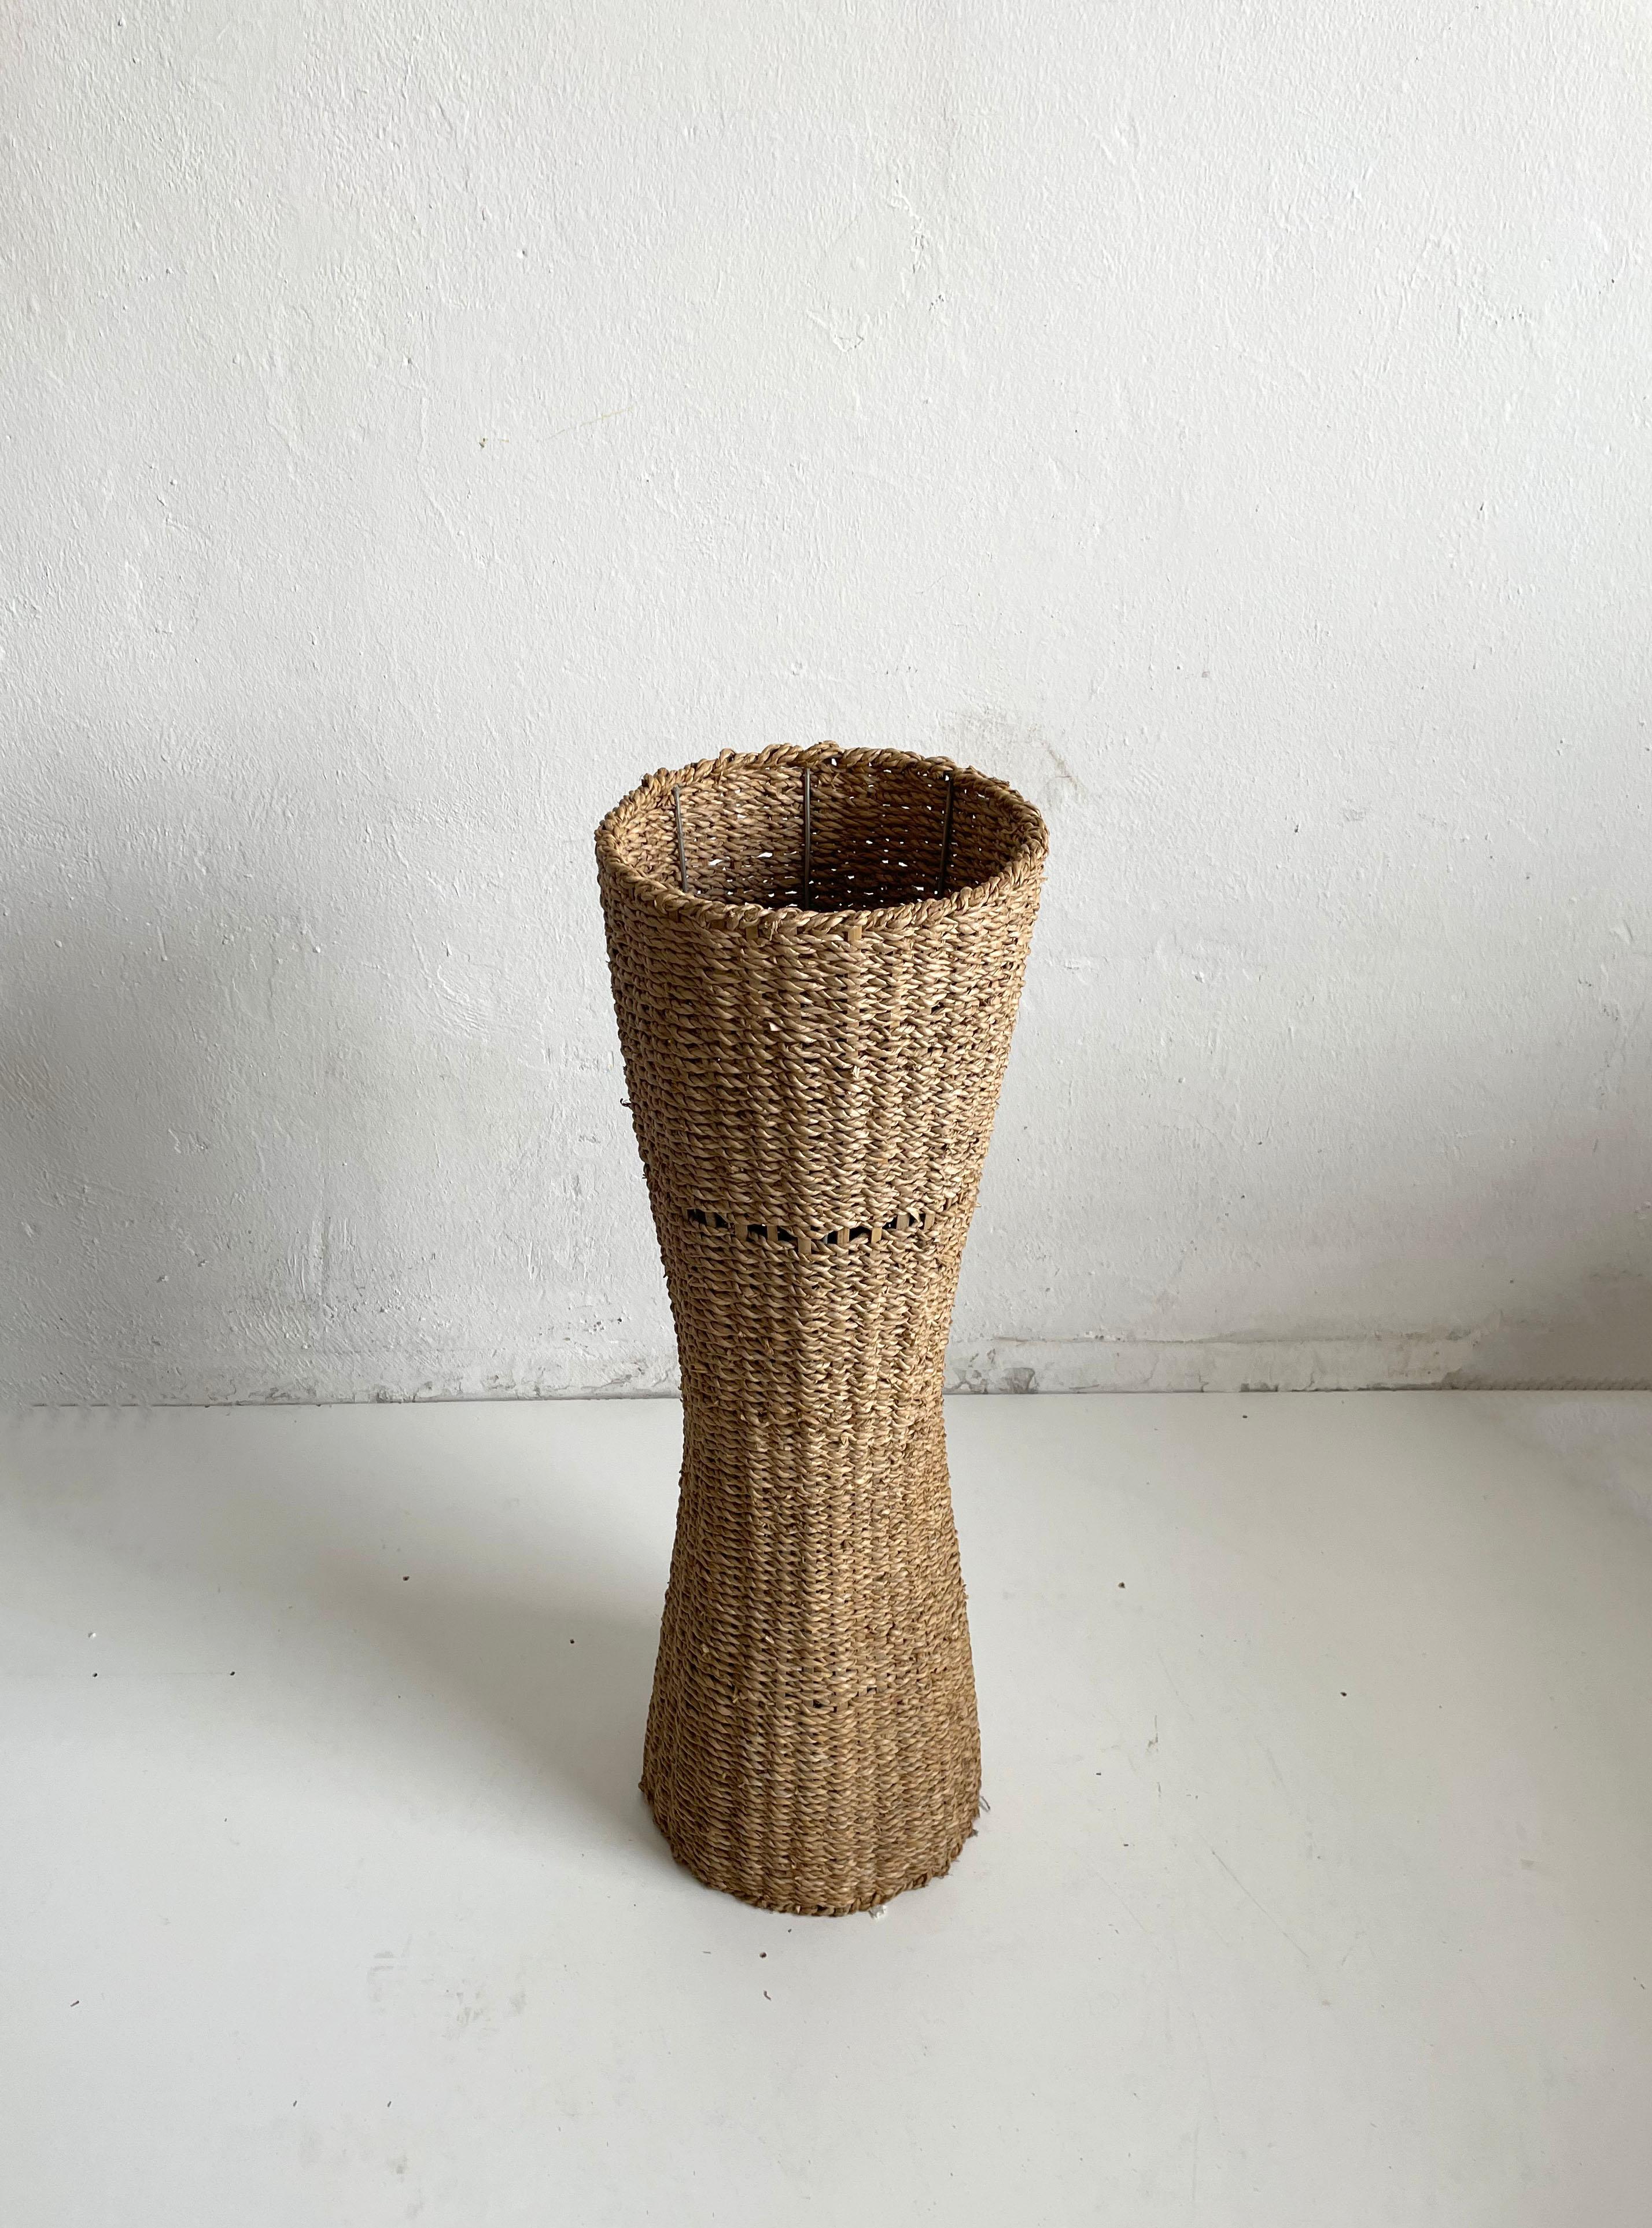 Organic Modern Mid Century Handwoven Banana Leaf Flower Pot Stand, Italy 1970s For Sale